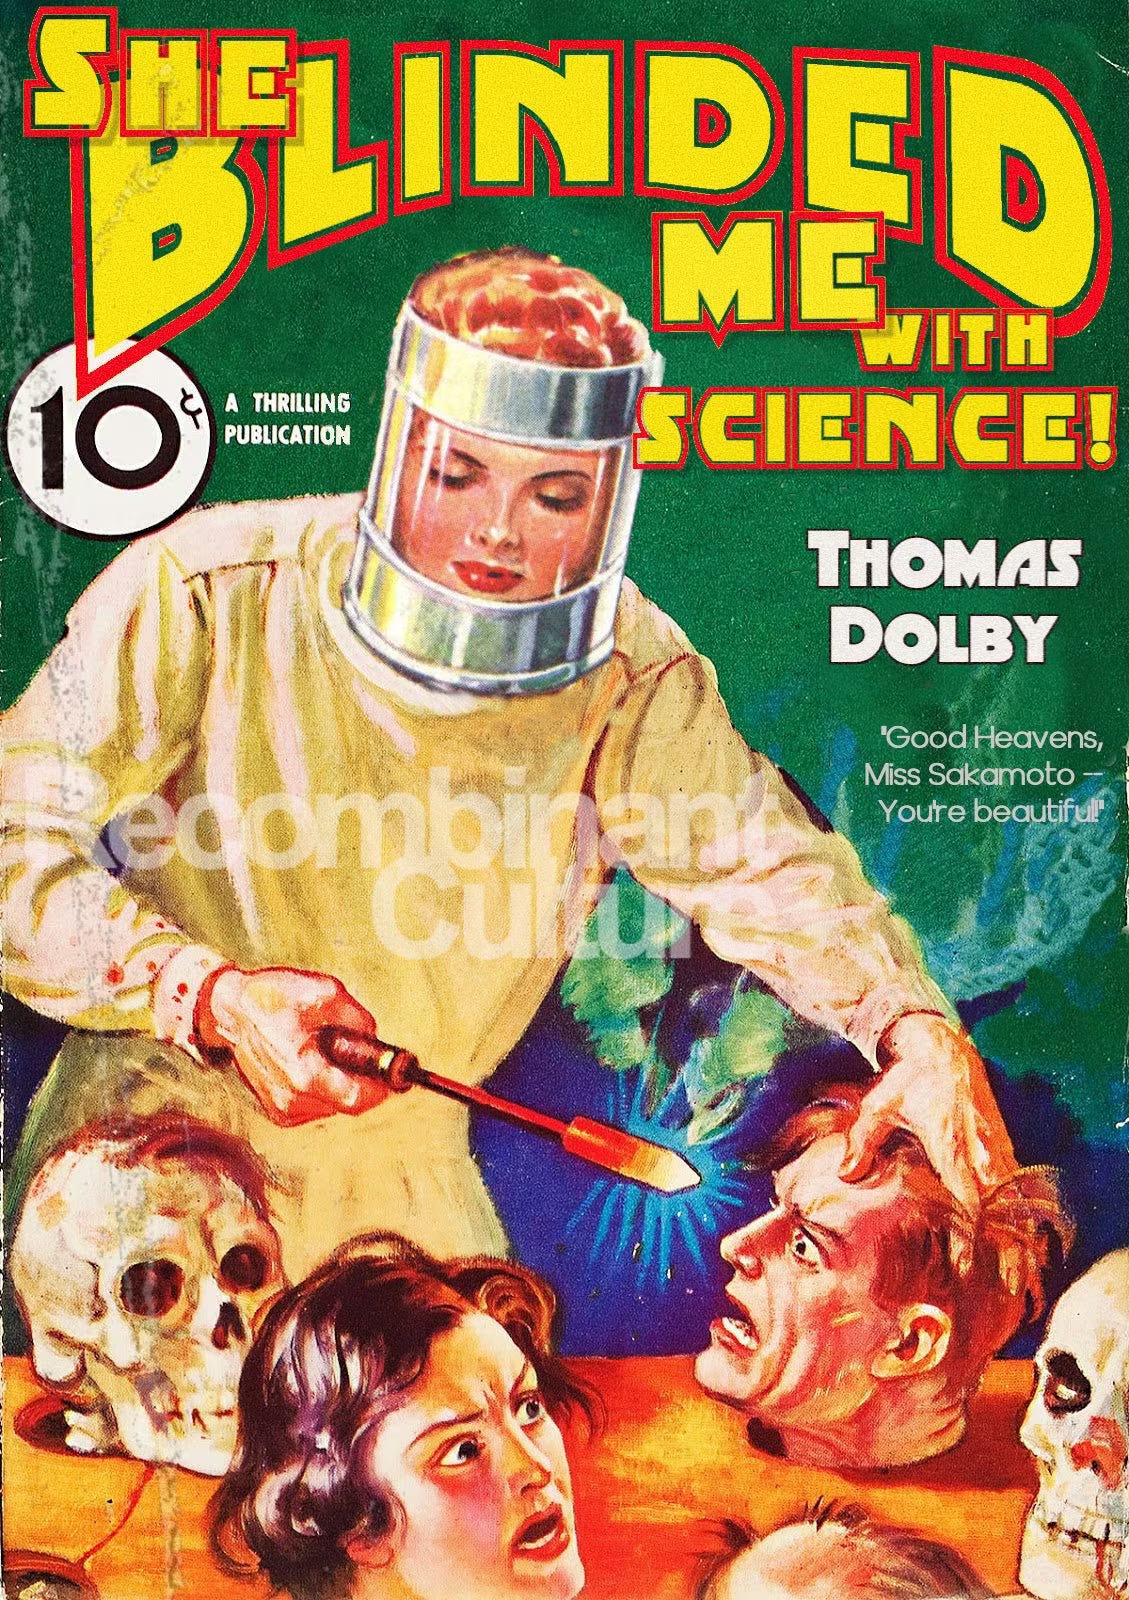 Cover of 1950s pulp novel with title ¨She Blinded Me With Science¨ and author name Thomas Dolby. Image is of lovely redheaded woman in space suit doing scary-looking experiments on human heads. 